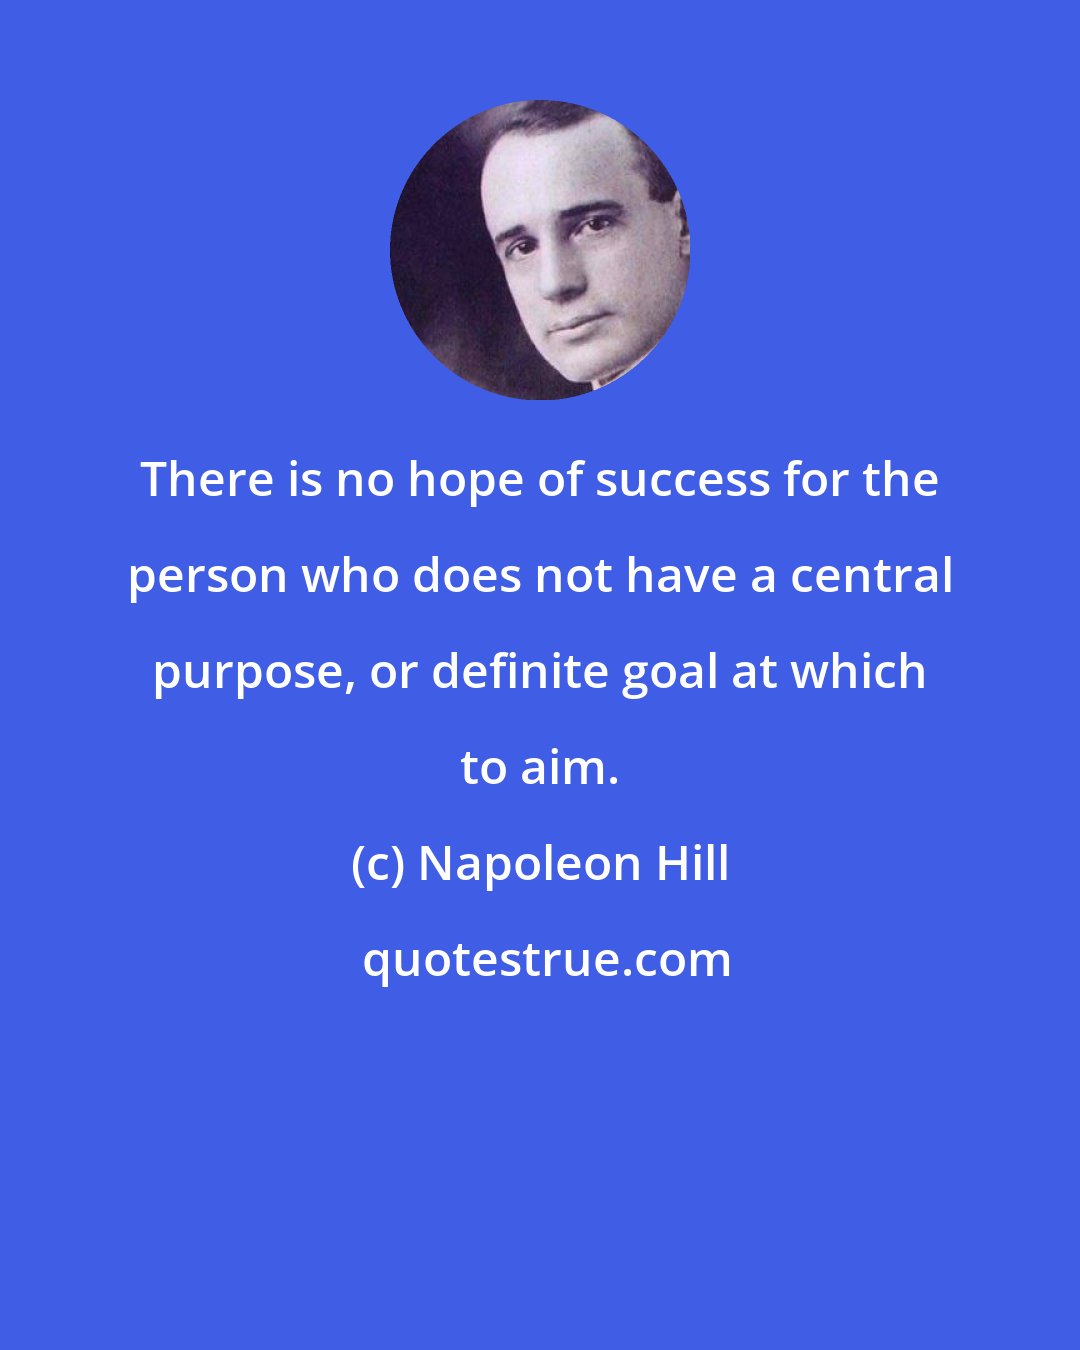 Napoleon Hill: There is no hope of success for the person who does not have a central purpose, or definite goal at which to aim.